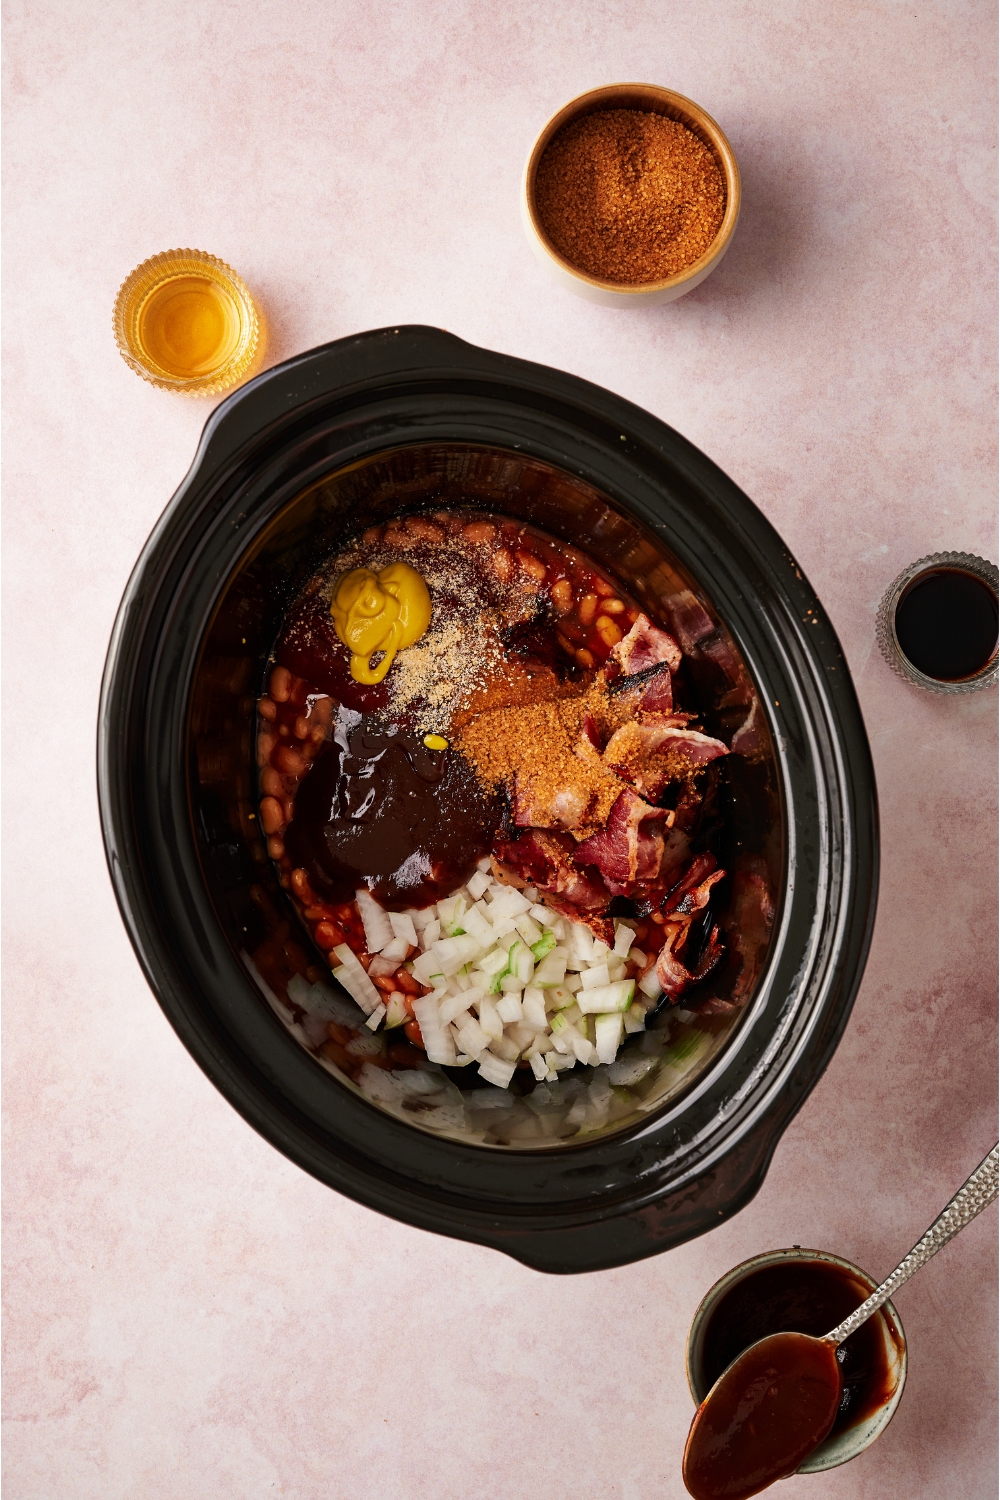 A crock pot filled with canned beans, diced onion, barbecue sauce, yellow mustard, and spices.